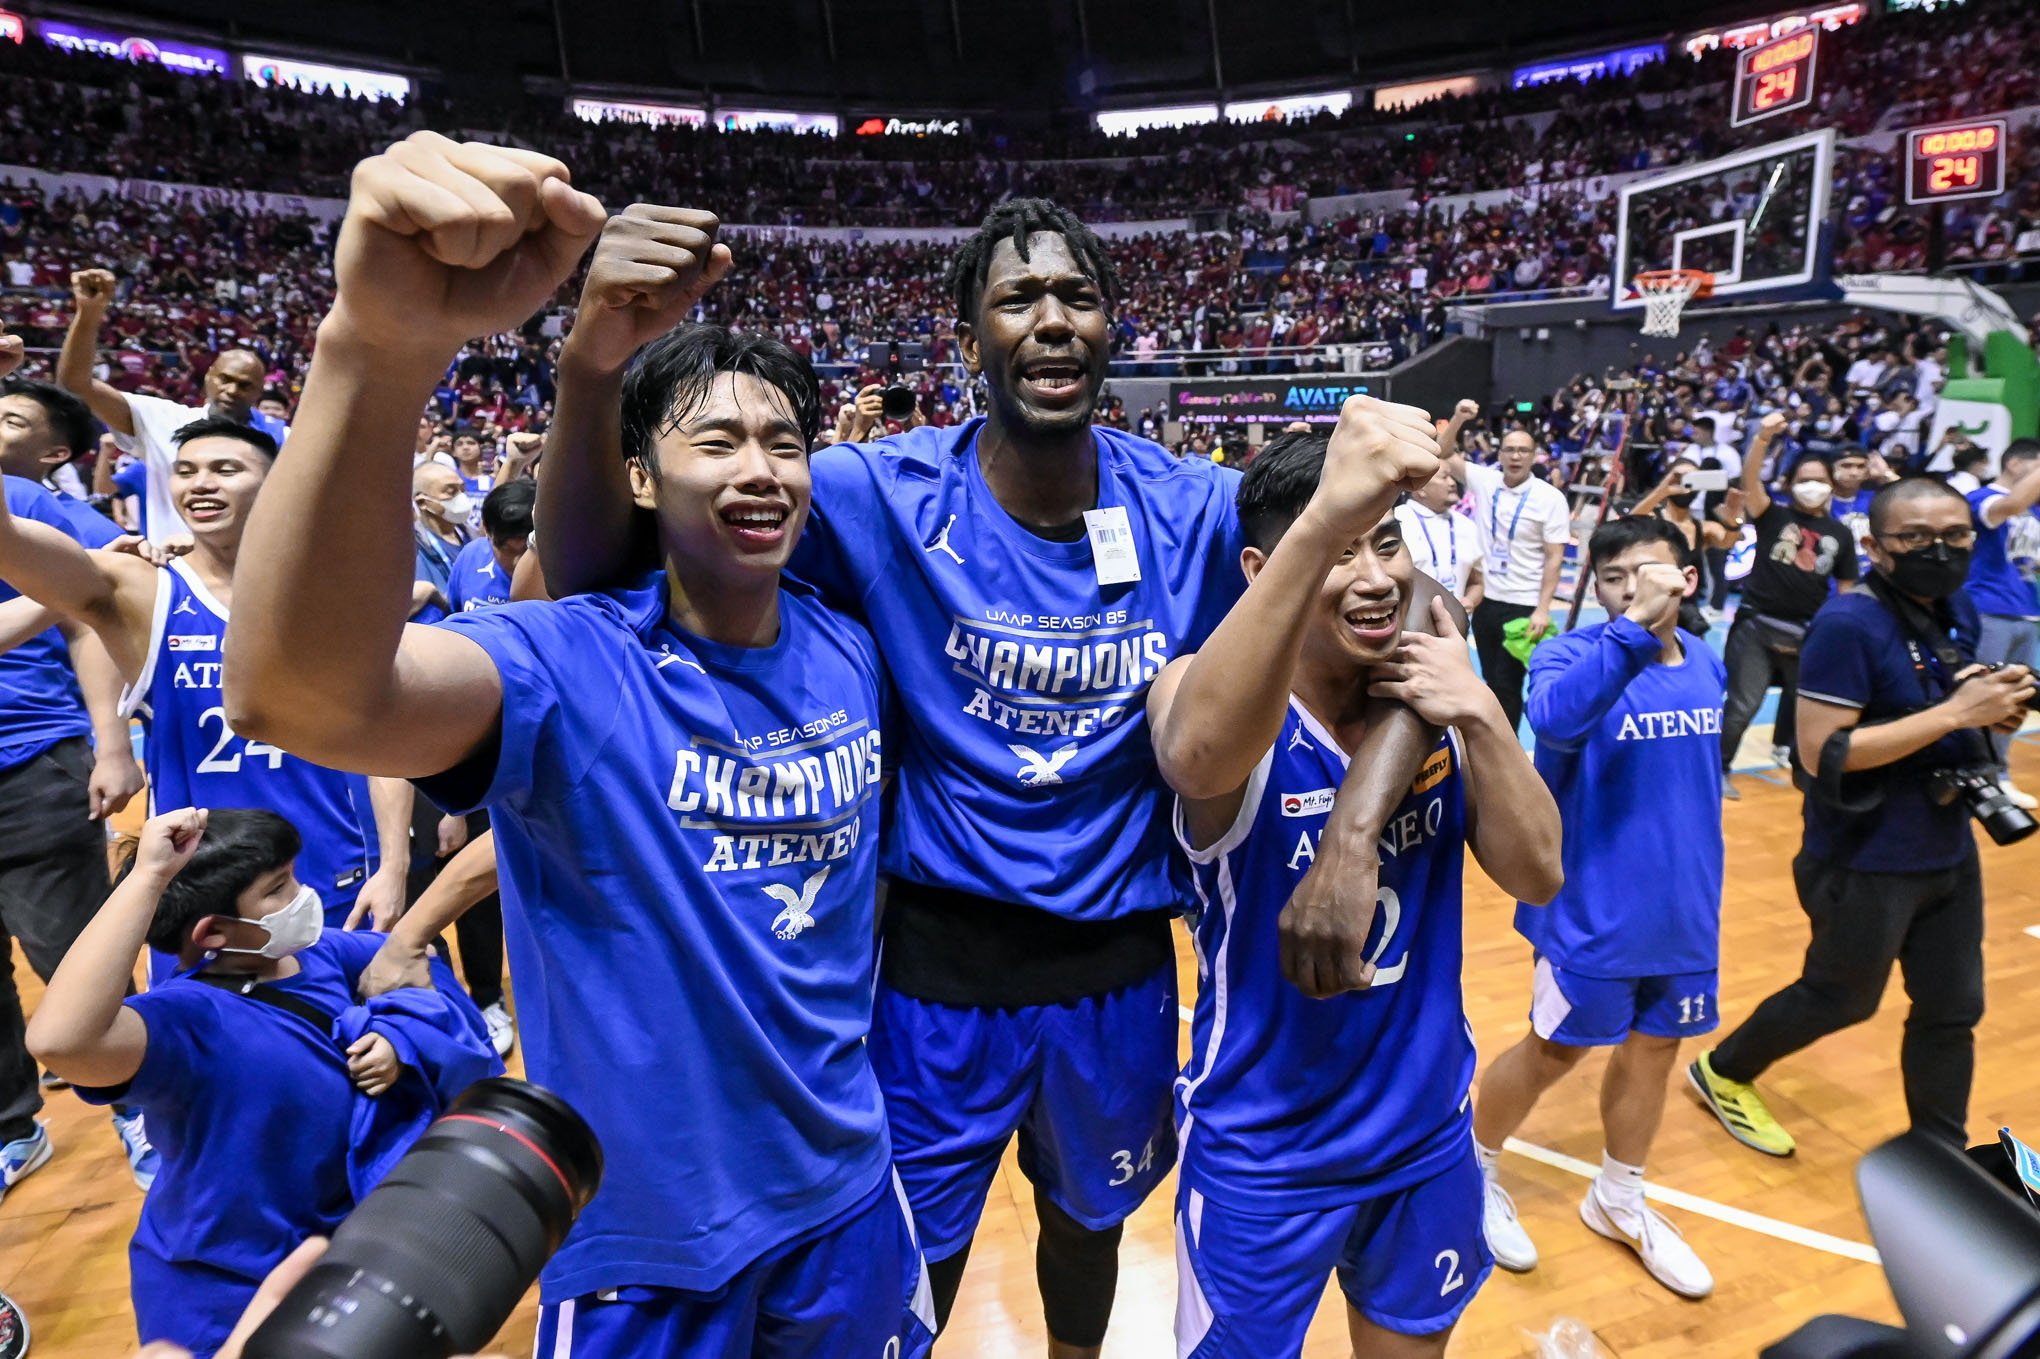 UAAP85-MBB-ILDEFONSO-KOUAME-ANDRADE-2 Ange Kouame's 'best season' is this unexpected Ateneo championship ADMU Basketball News UAAP  - philippine sports news